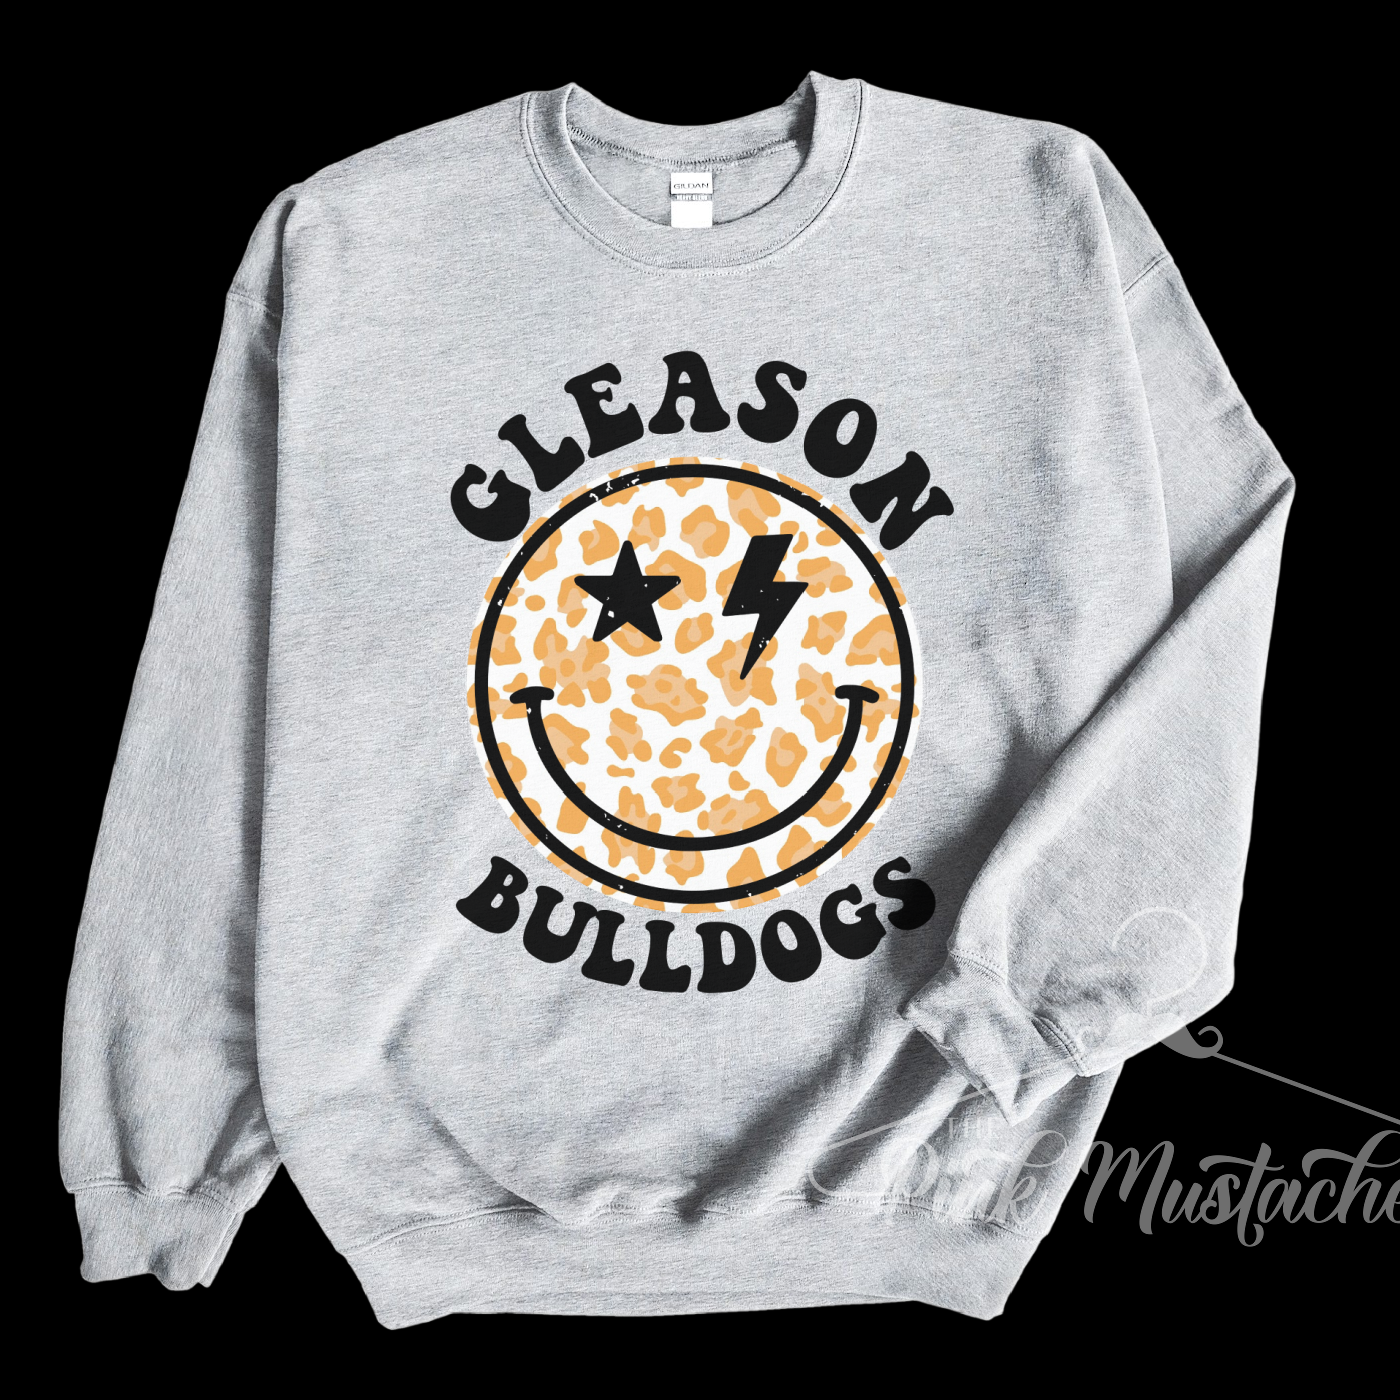 Gleason Bulldogs Distressed Smiley Unisex Sweatshirt / Toddler, Youth, and Adult Sizes